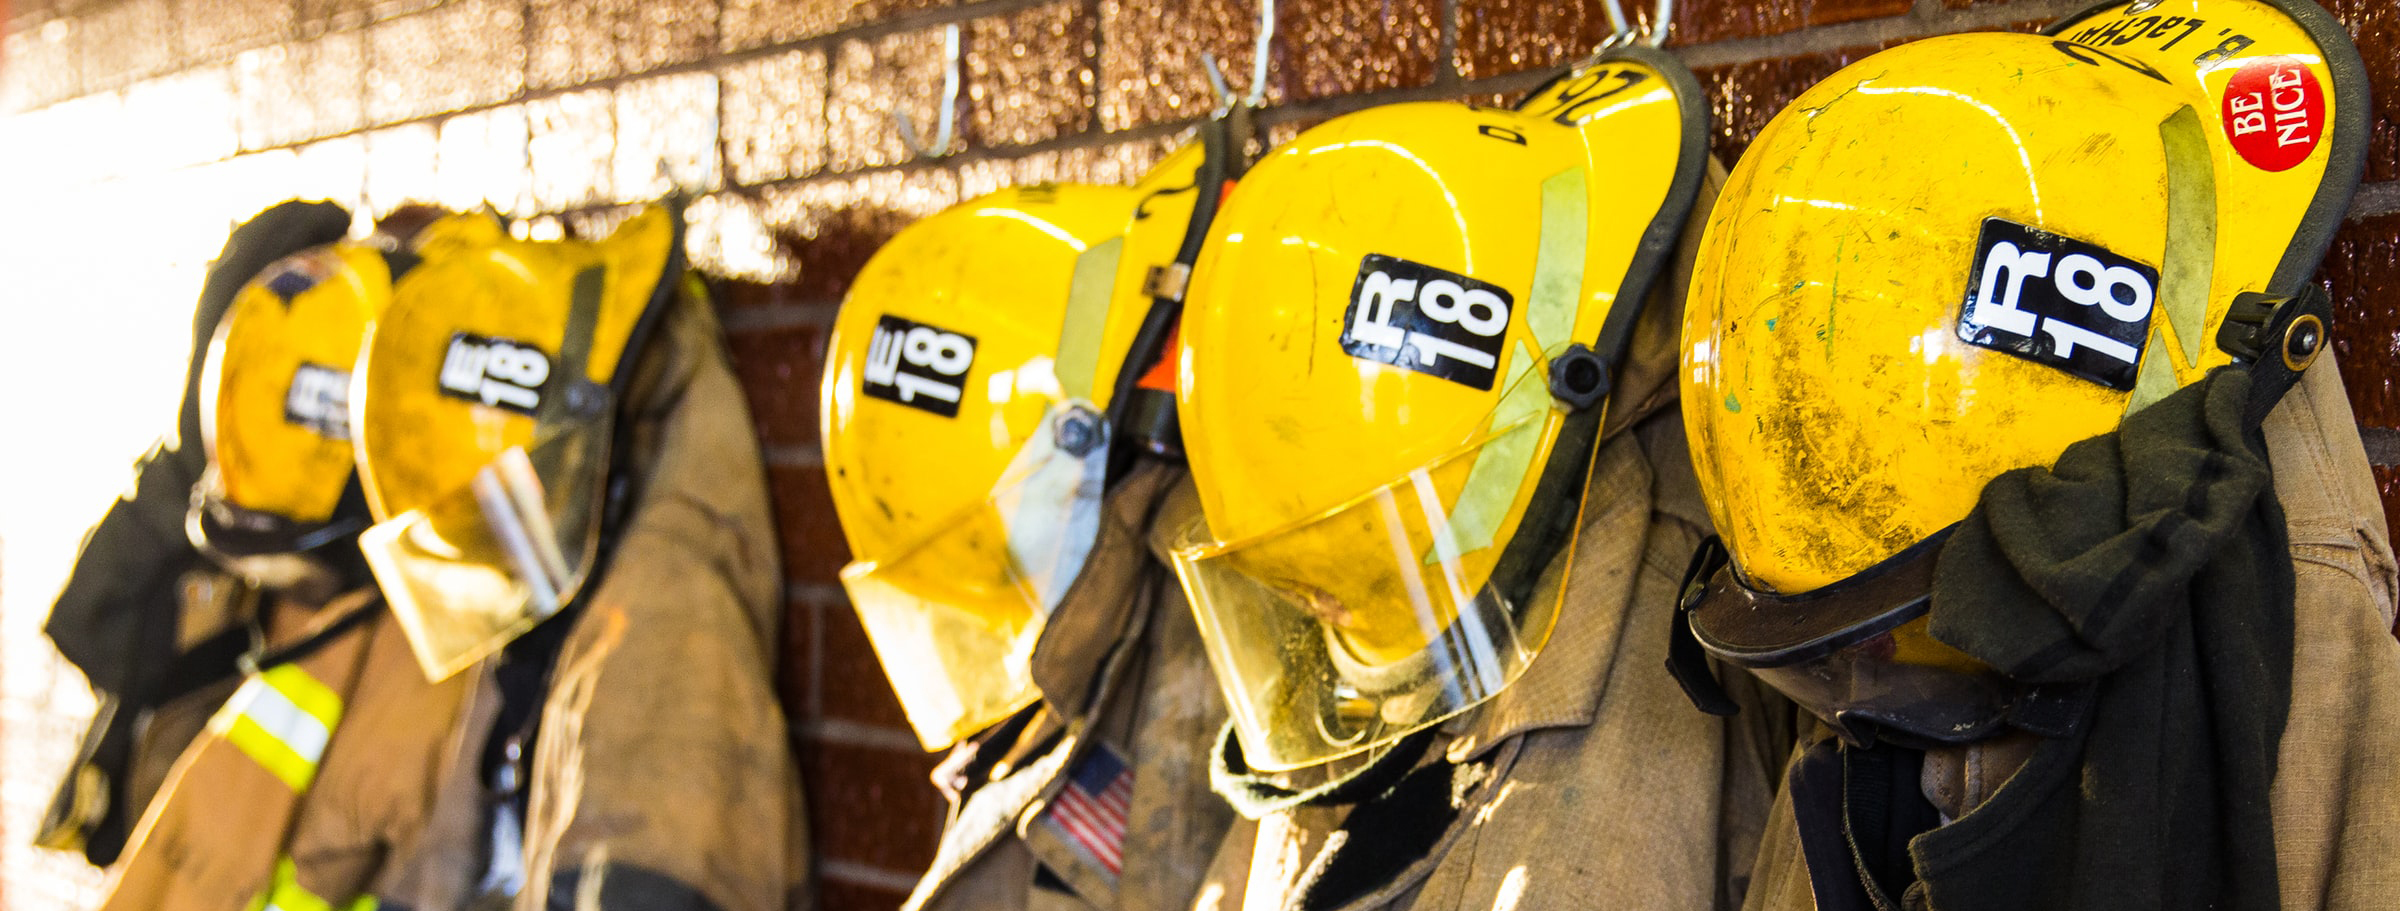 A line of firefighter suits hanging on hooks